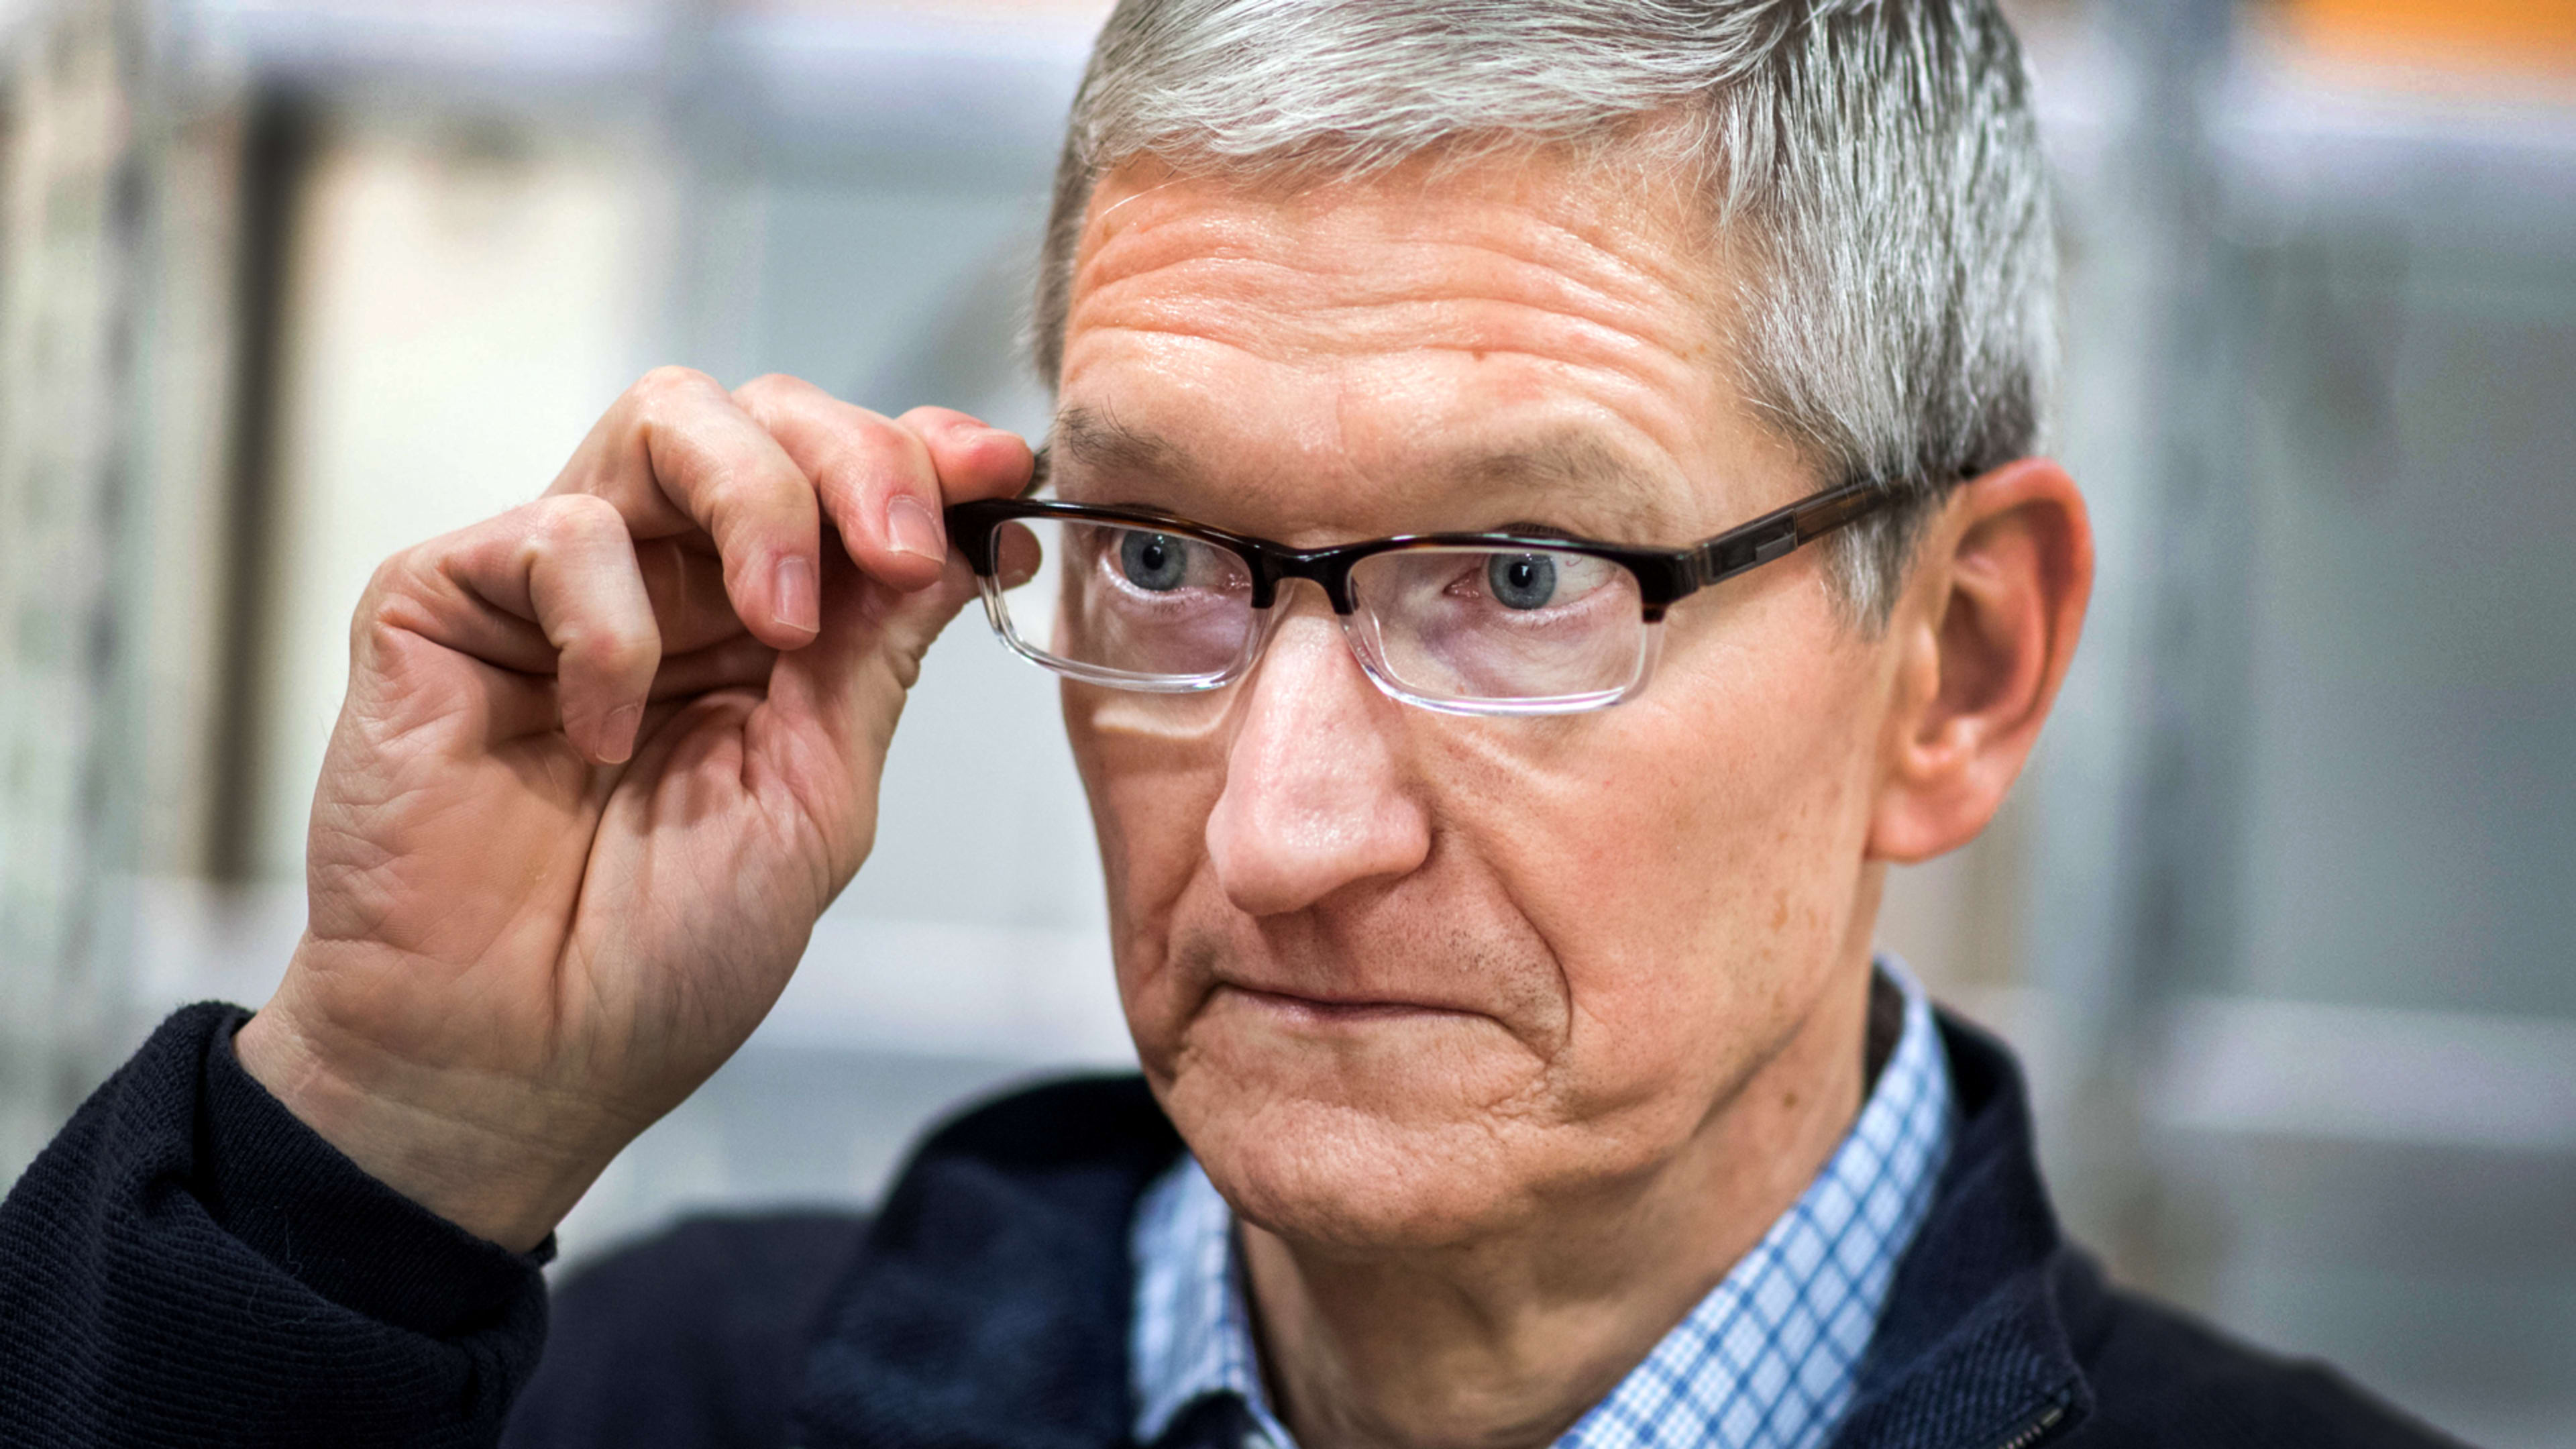 After the Paradise Papers, a German paper wrote an open letter to Tim Cook asking why